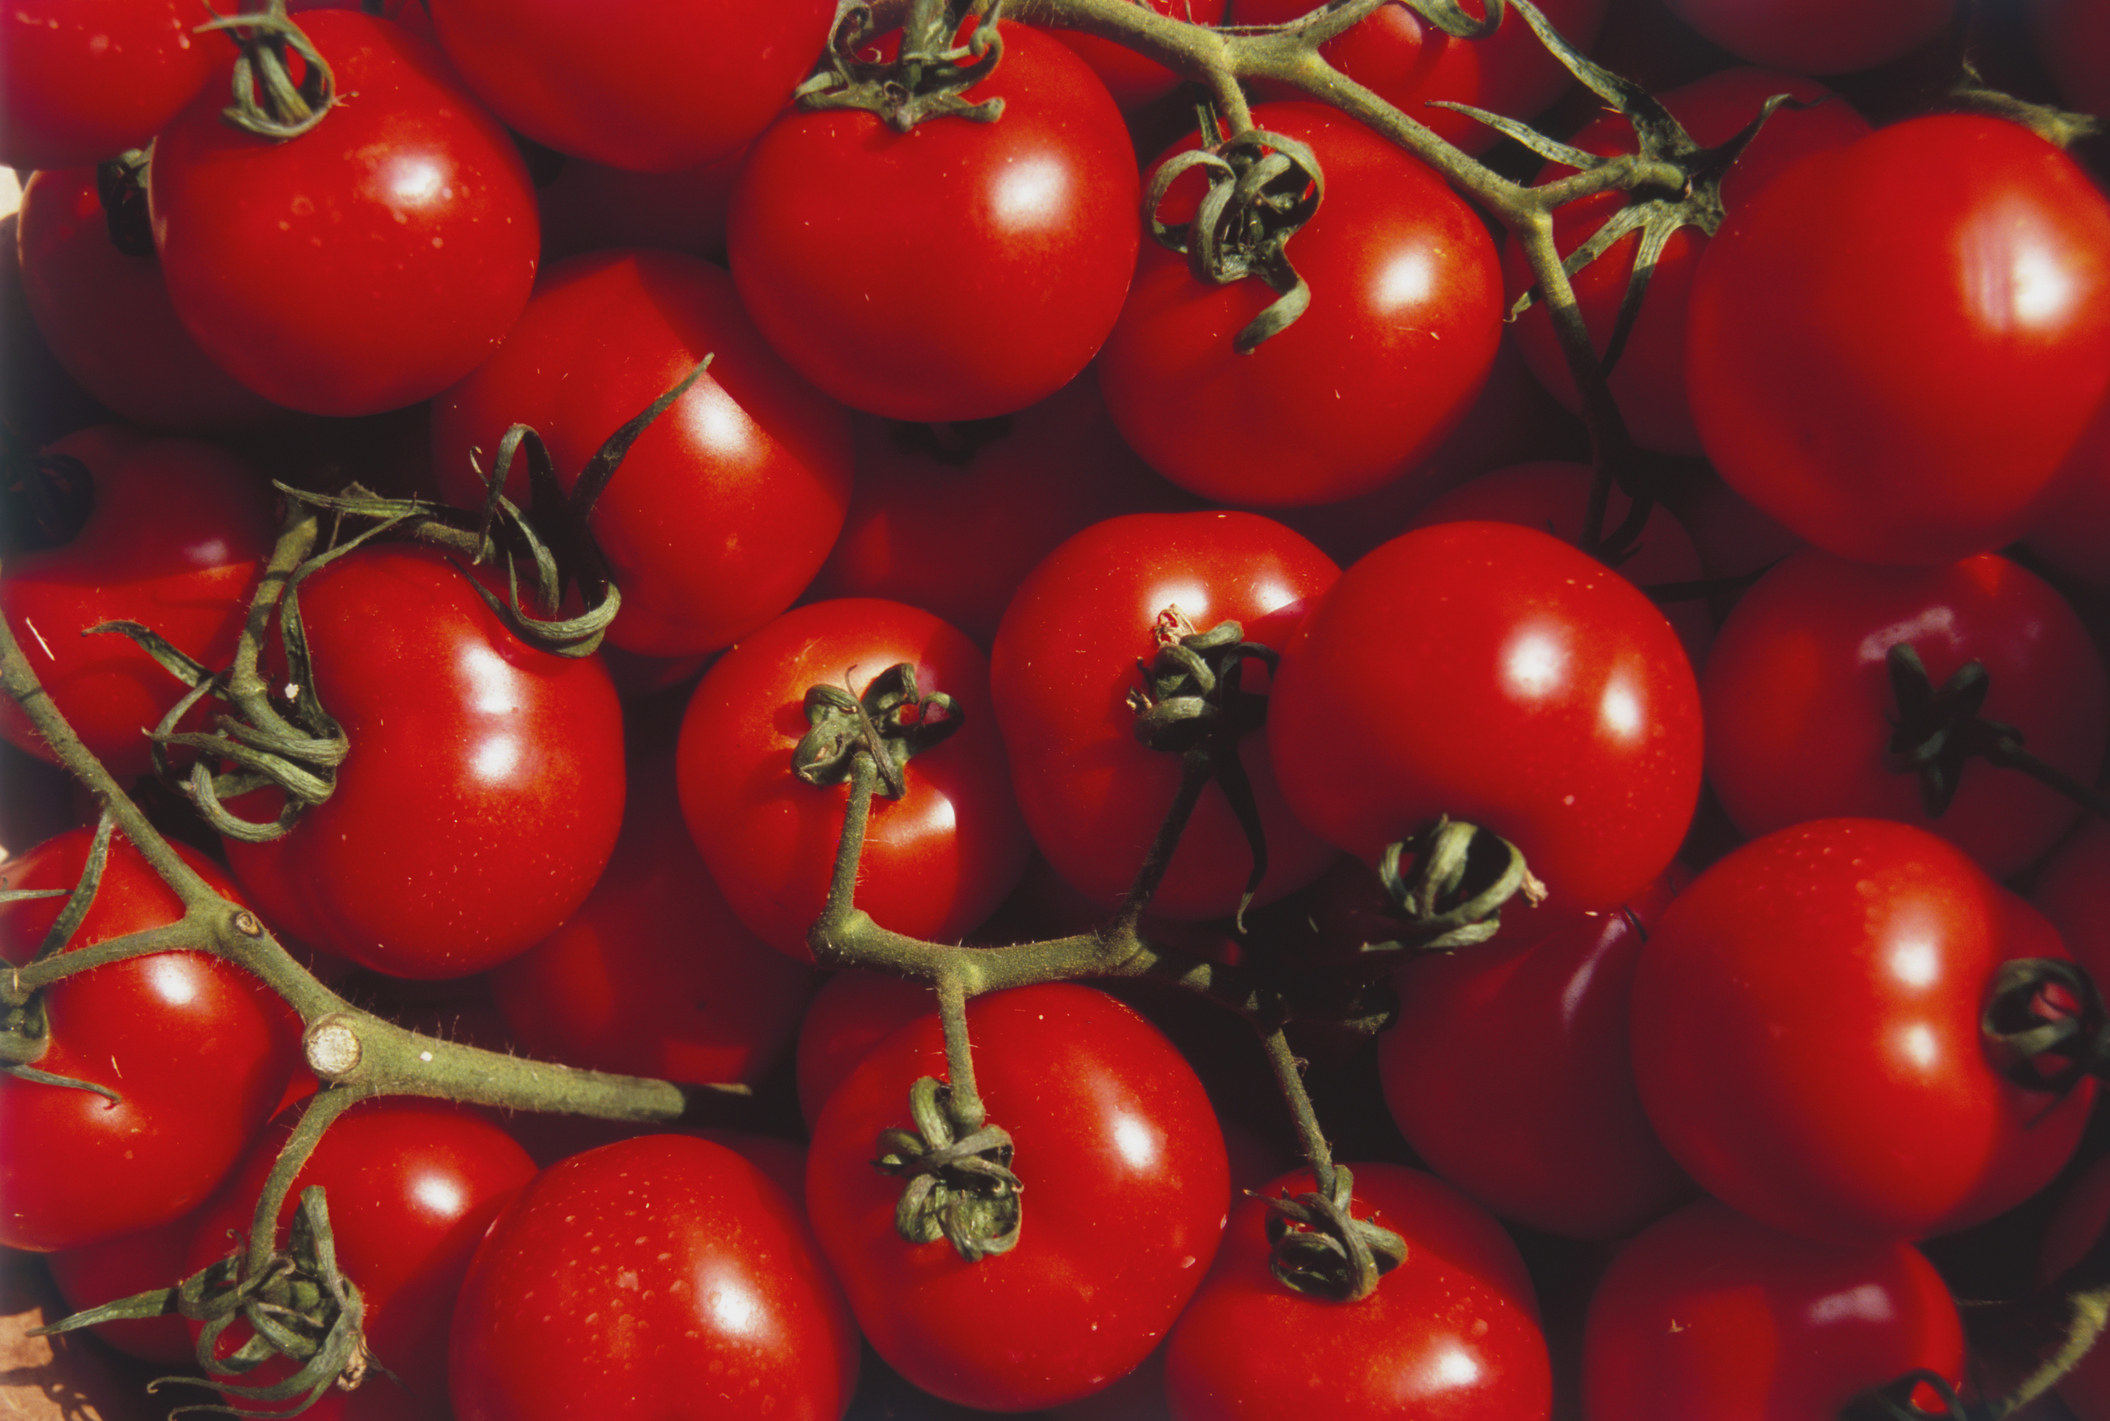 A close up of red tomatoes